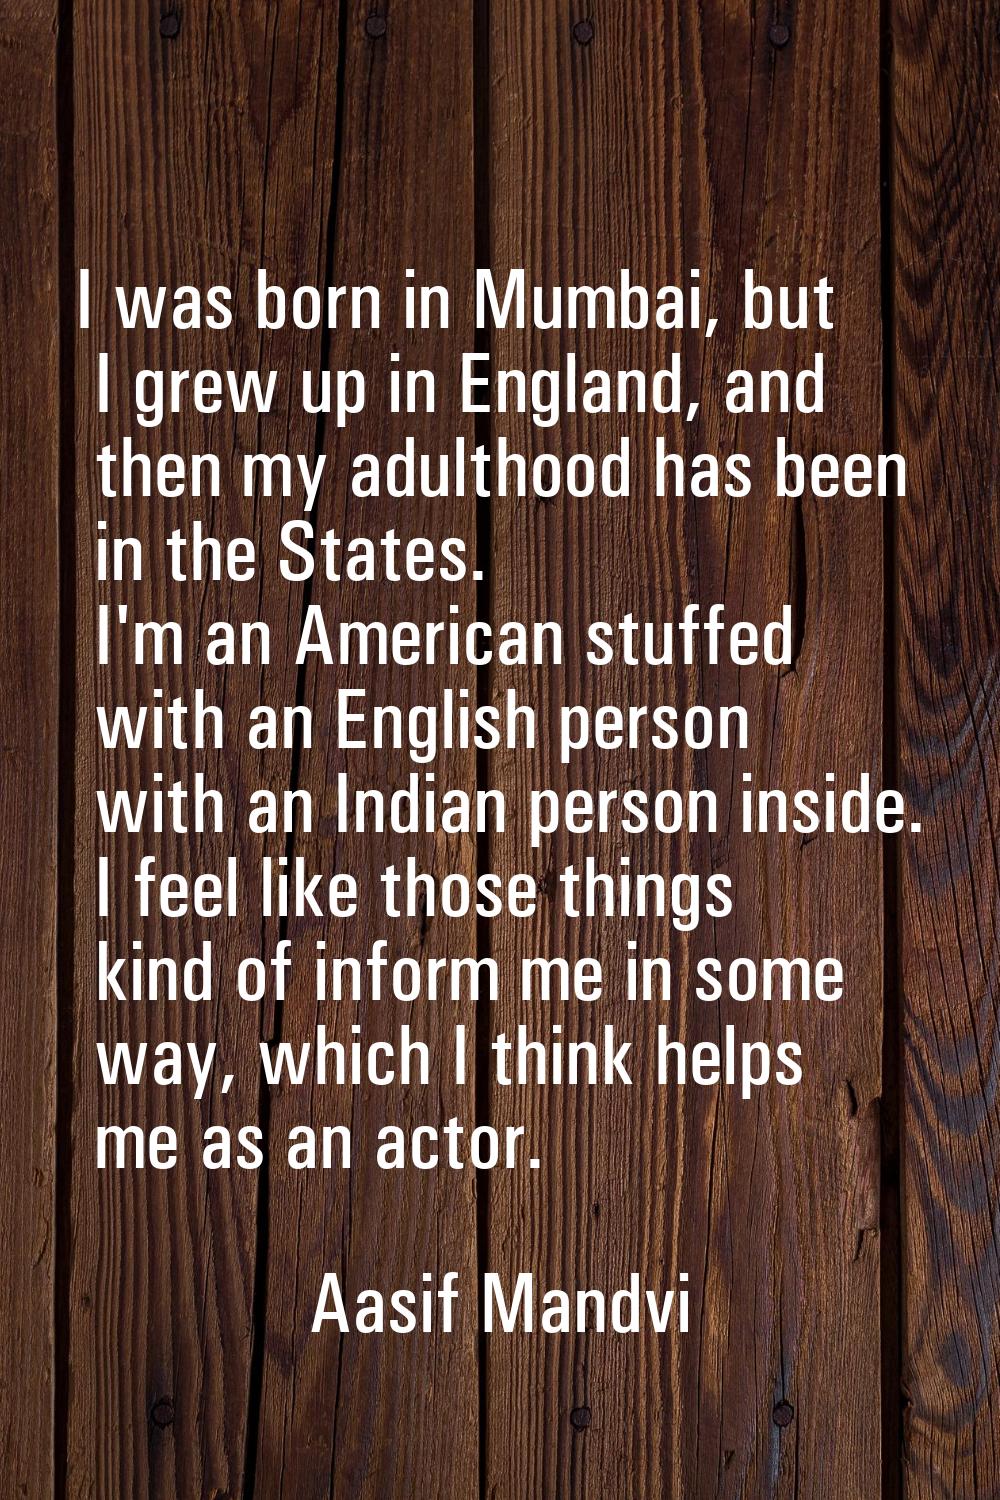 I was born in Mumbai, but I grew up in England, and then my adulthood has been in the States. I'm a